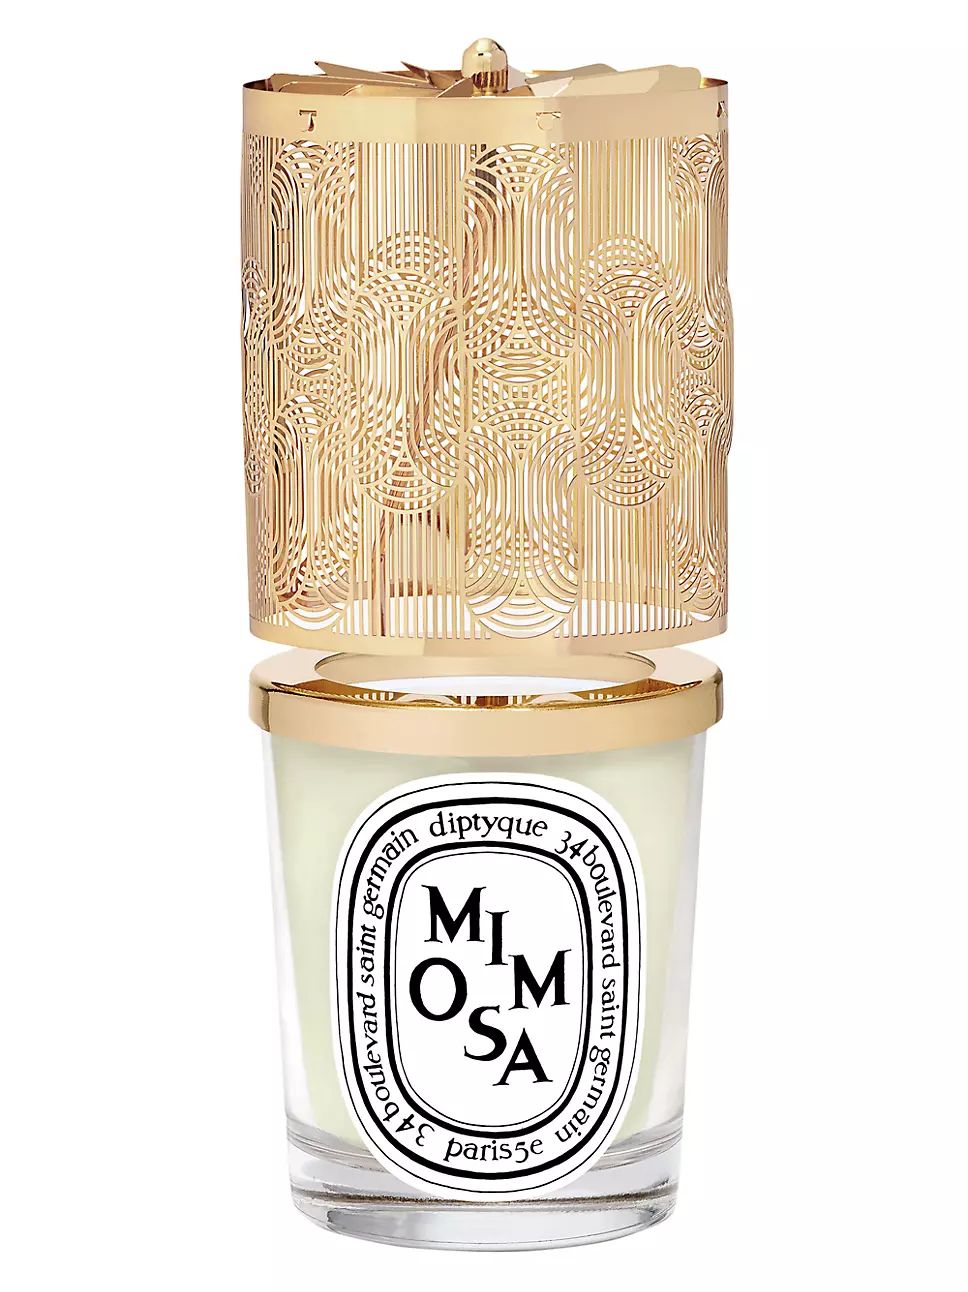 Diptyque Mimosa Candle Lantern Holiday Gift Set | Saks Fifth Avenue